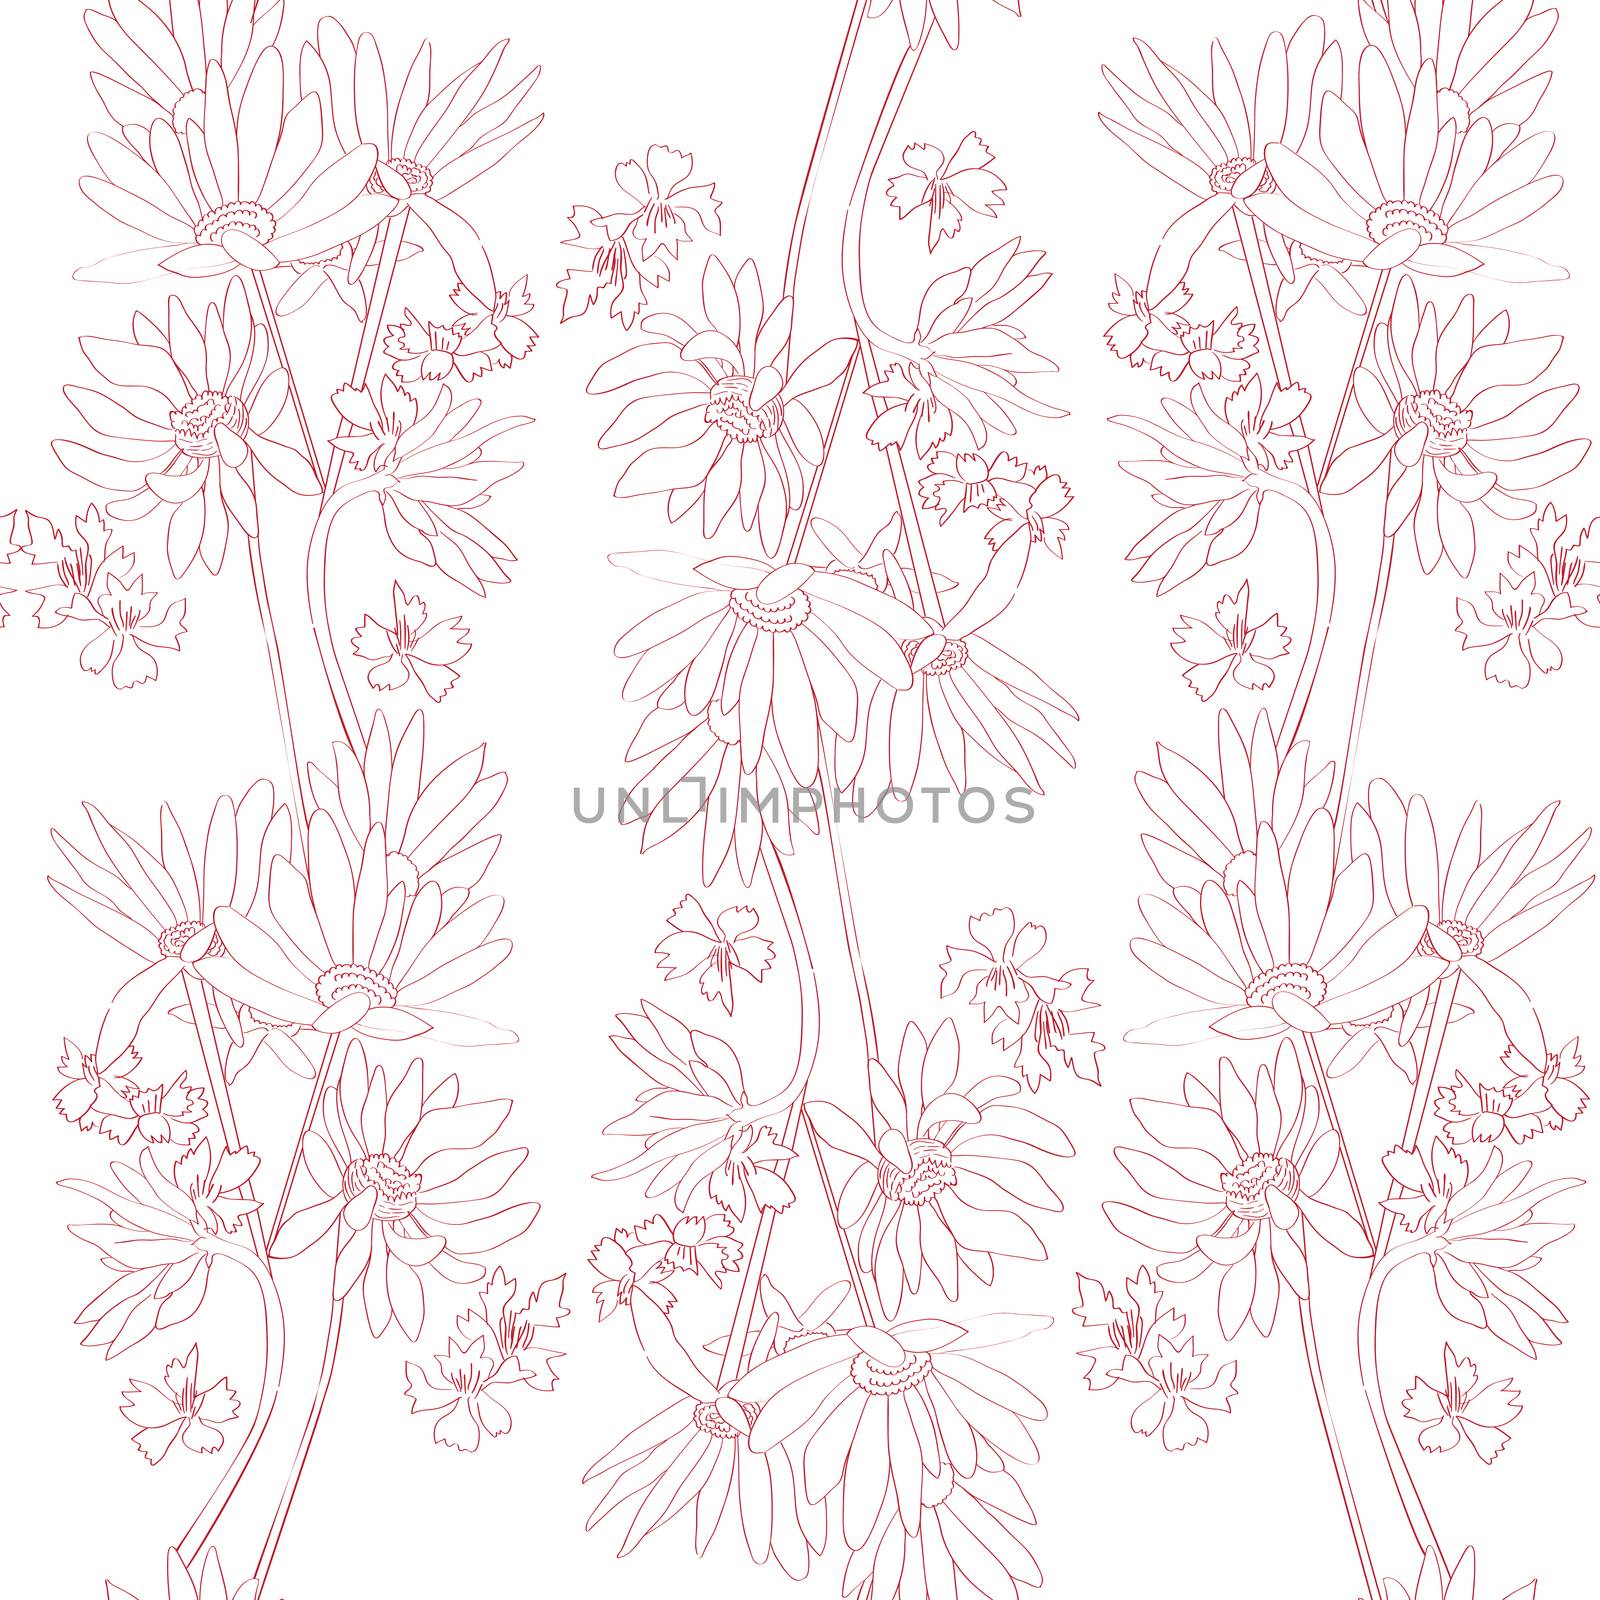 Seamless retro pattern with daisies and cornflowers over white background